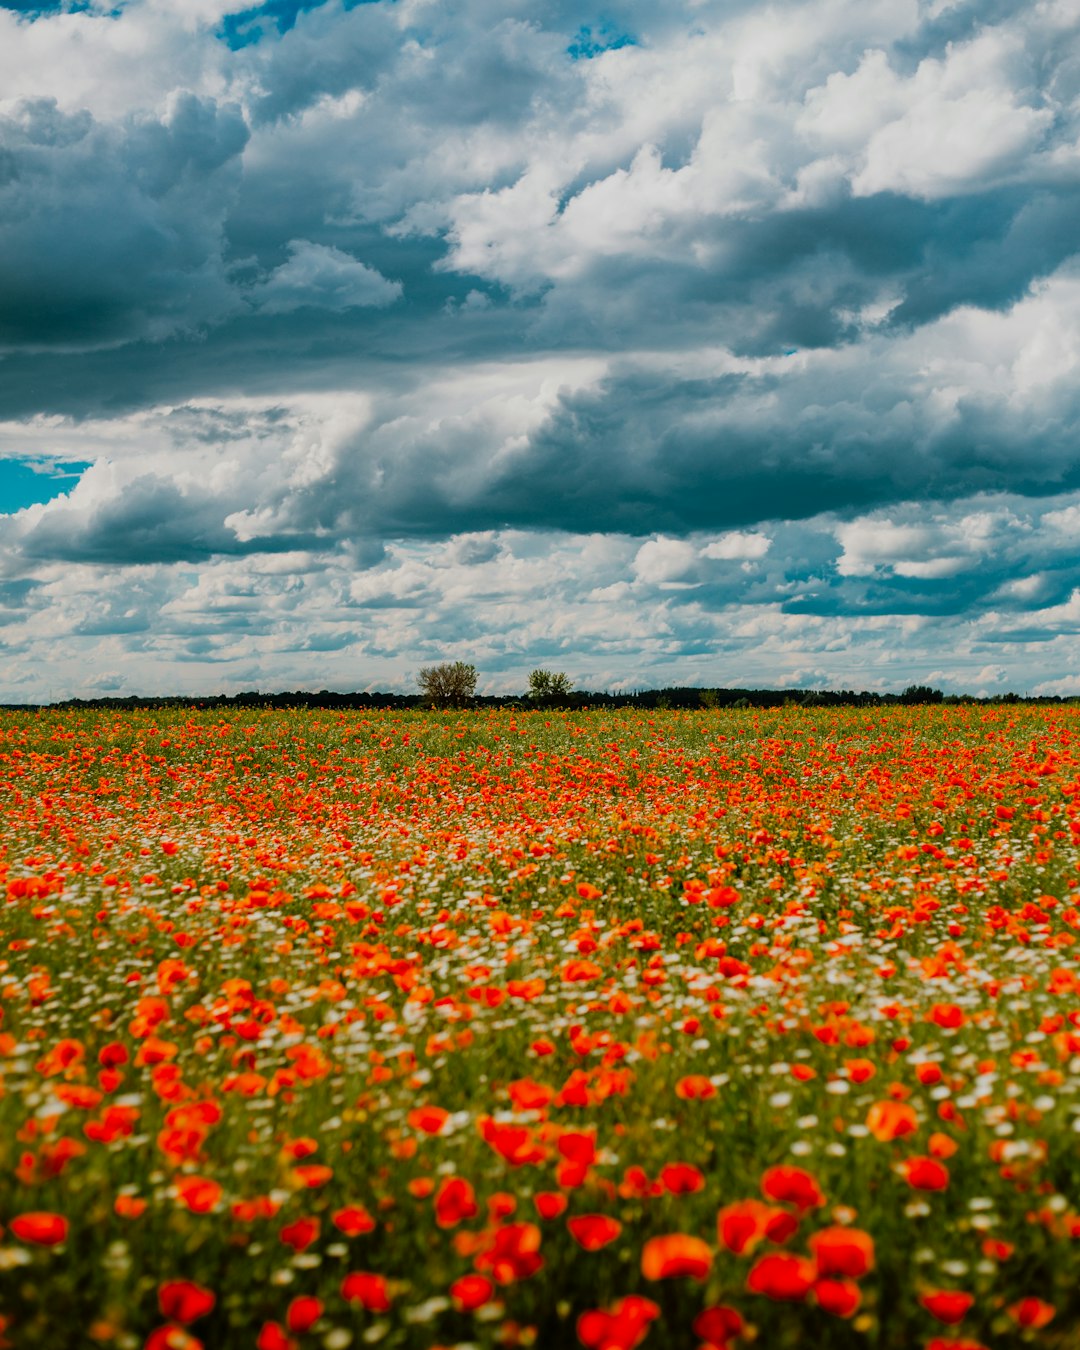 red flower field under cloudy sky during daytime